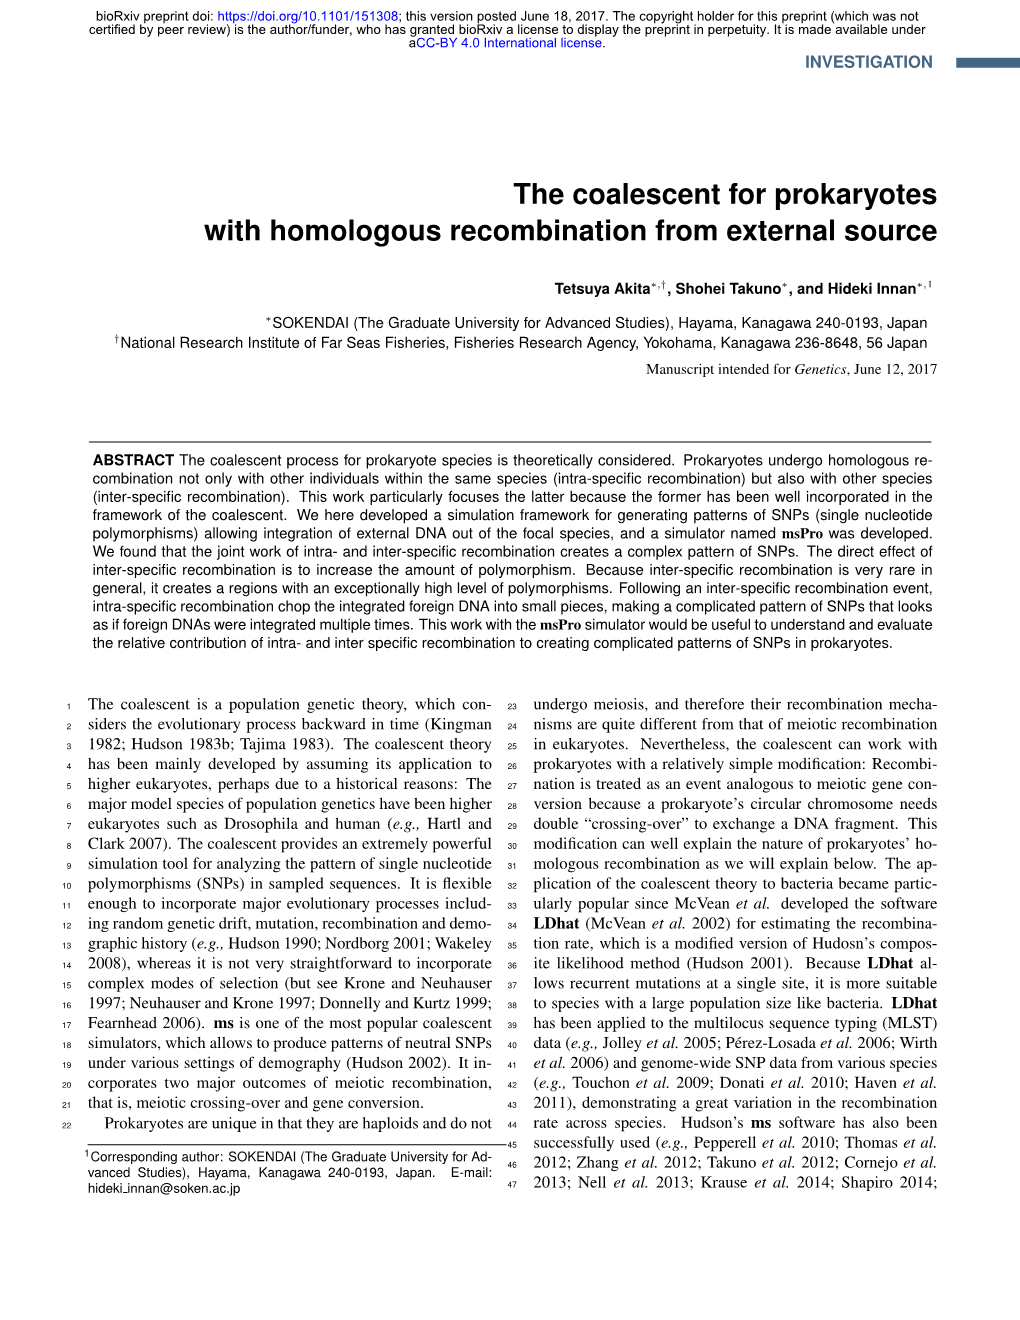 The Coalescent for Prokaryotes with Homologous Recombination from External Source